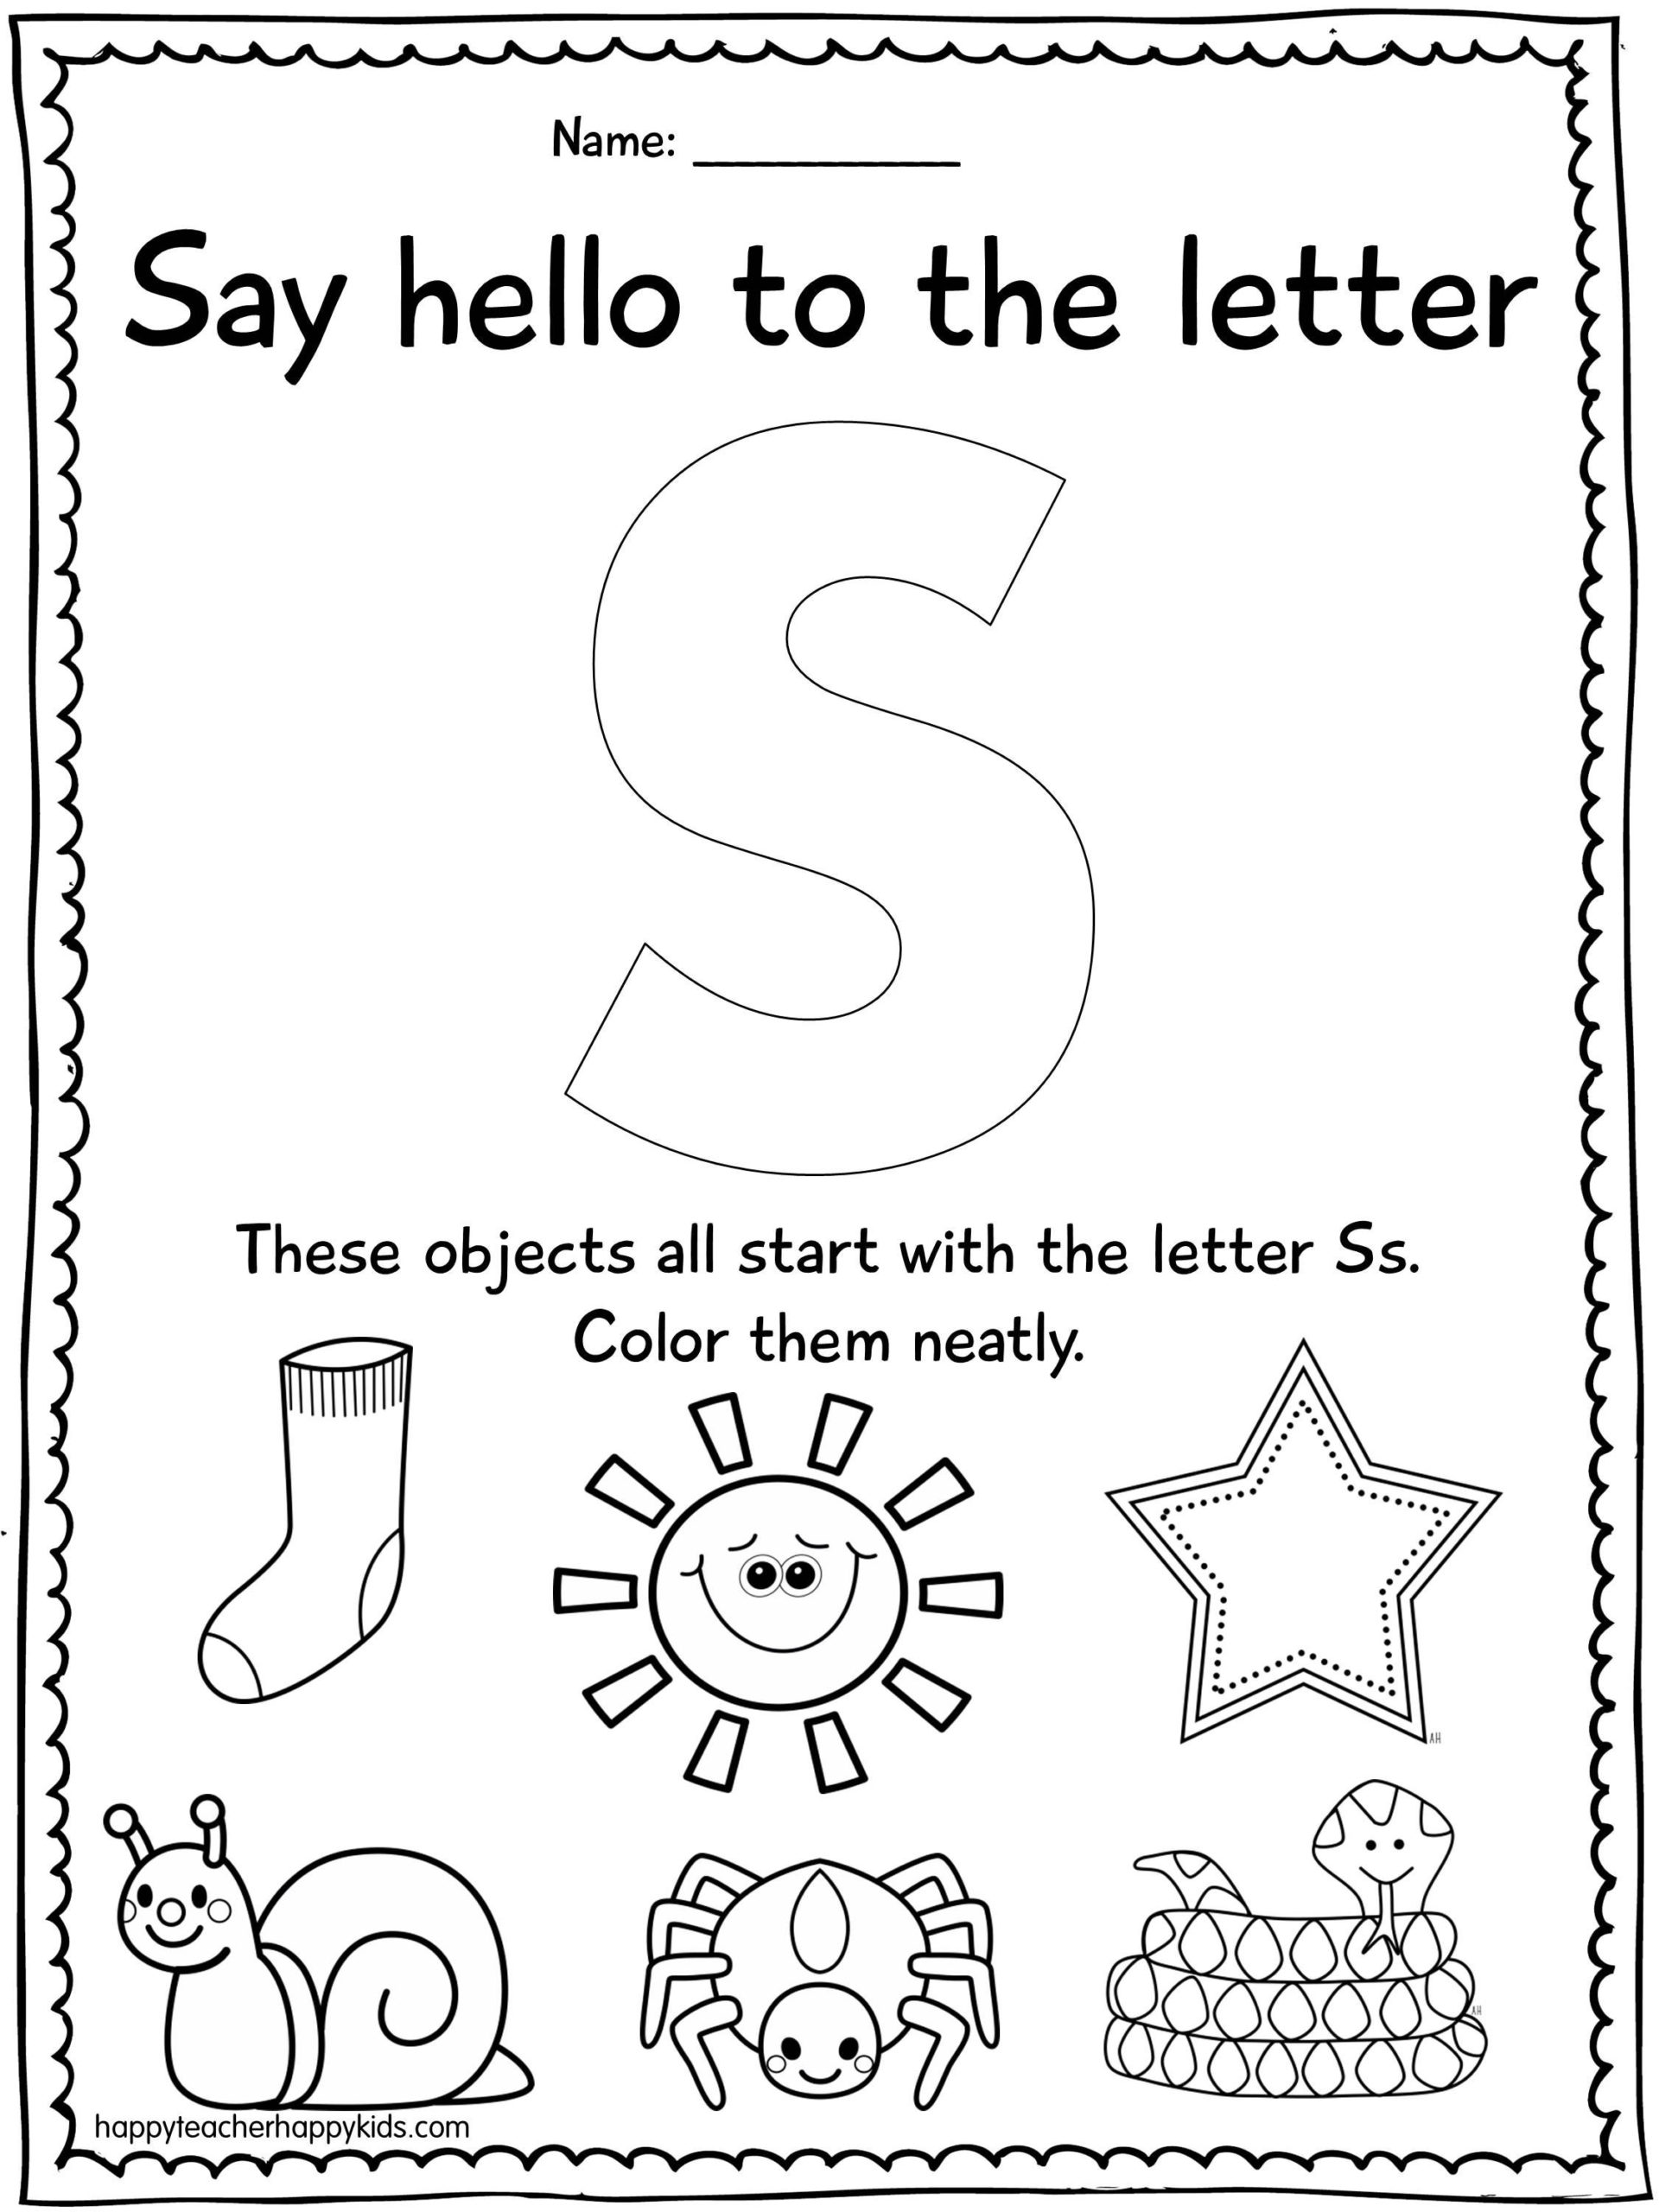 Alphabet Activities For The Letter S- Perfect For Preschool